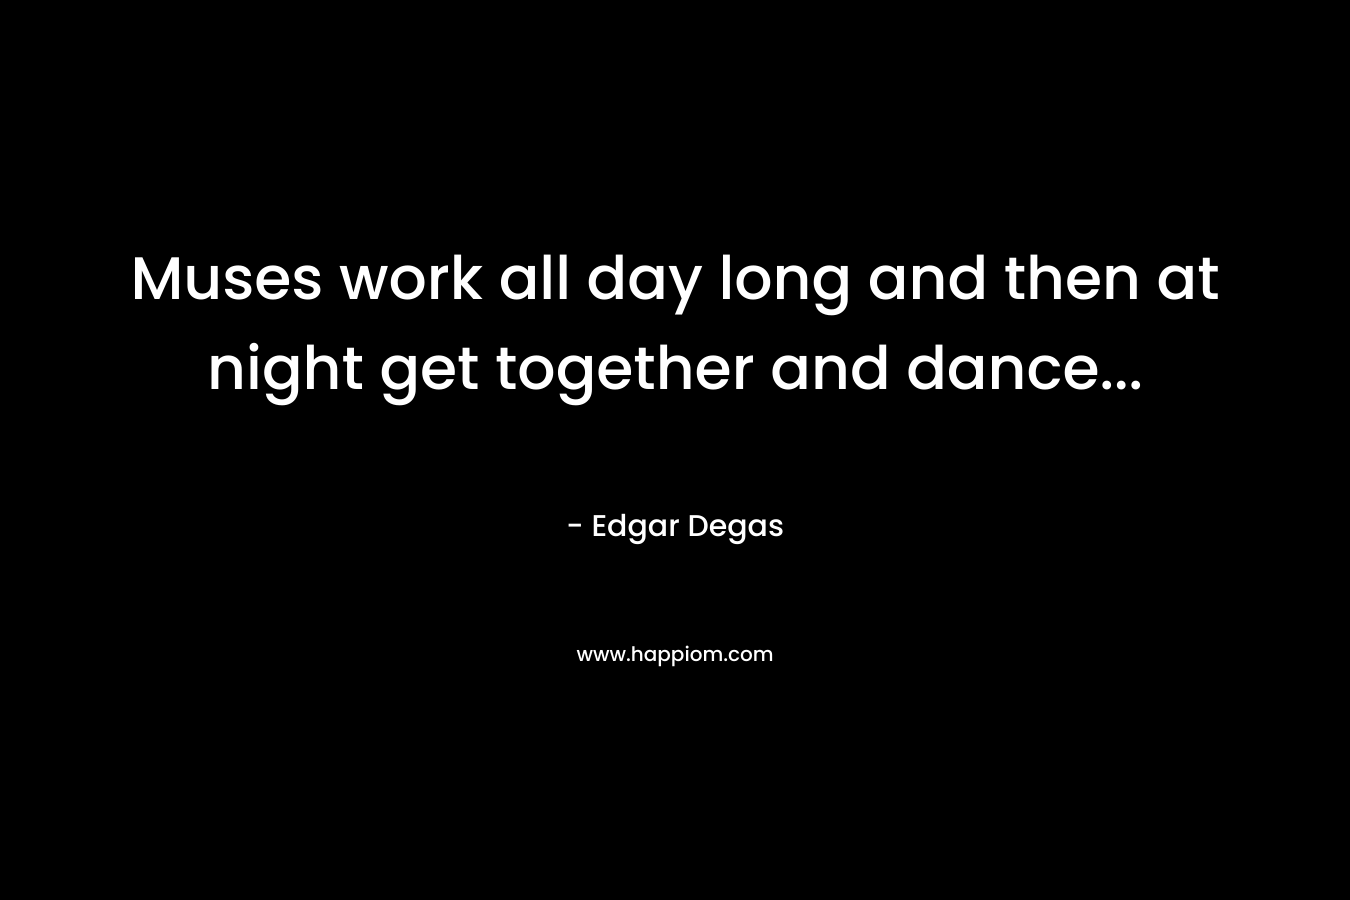 Muses work all day long and then at night get together and dance...